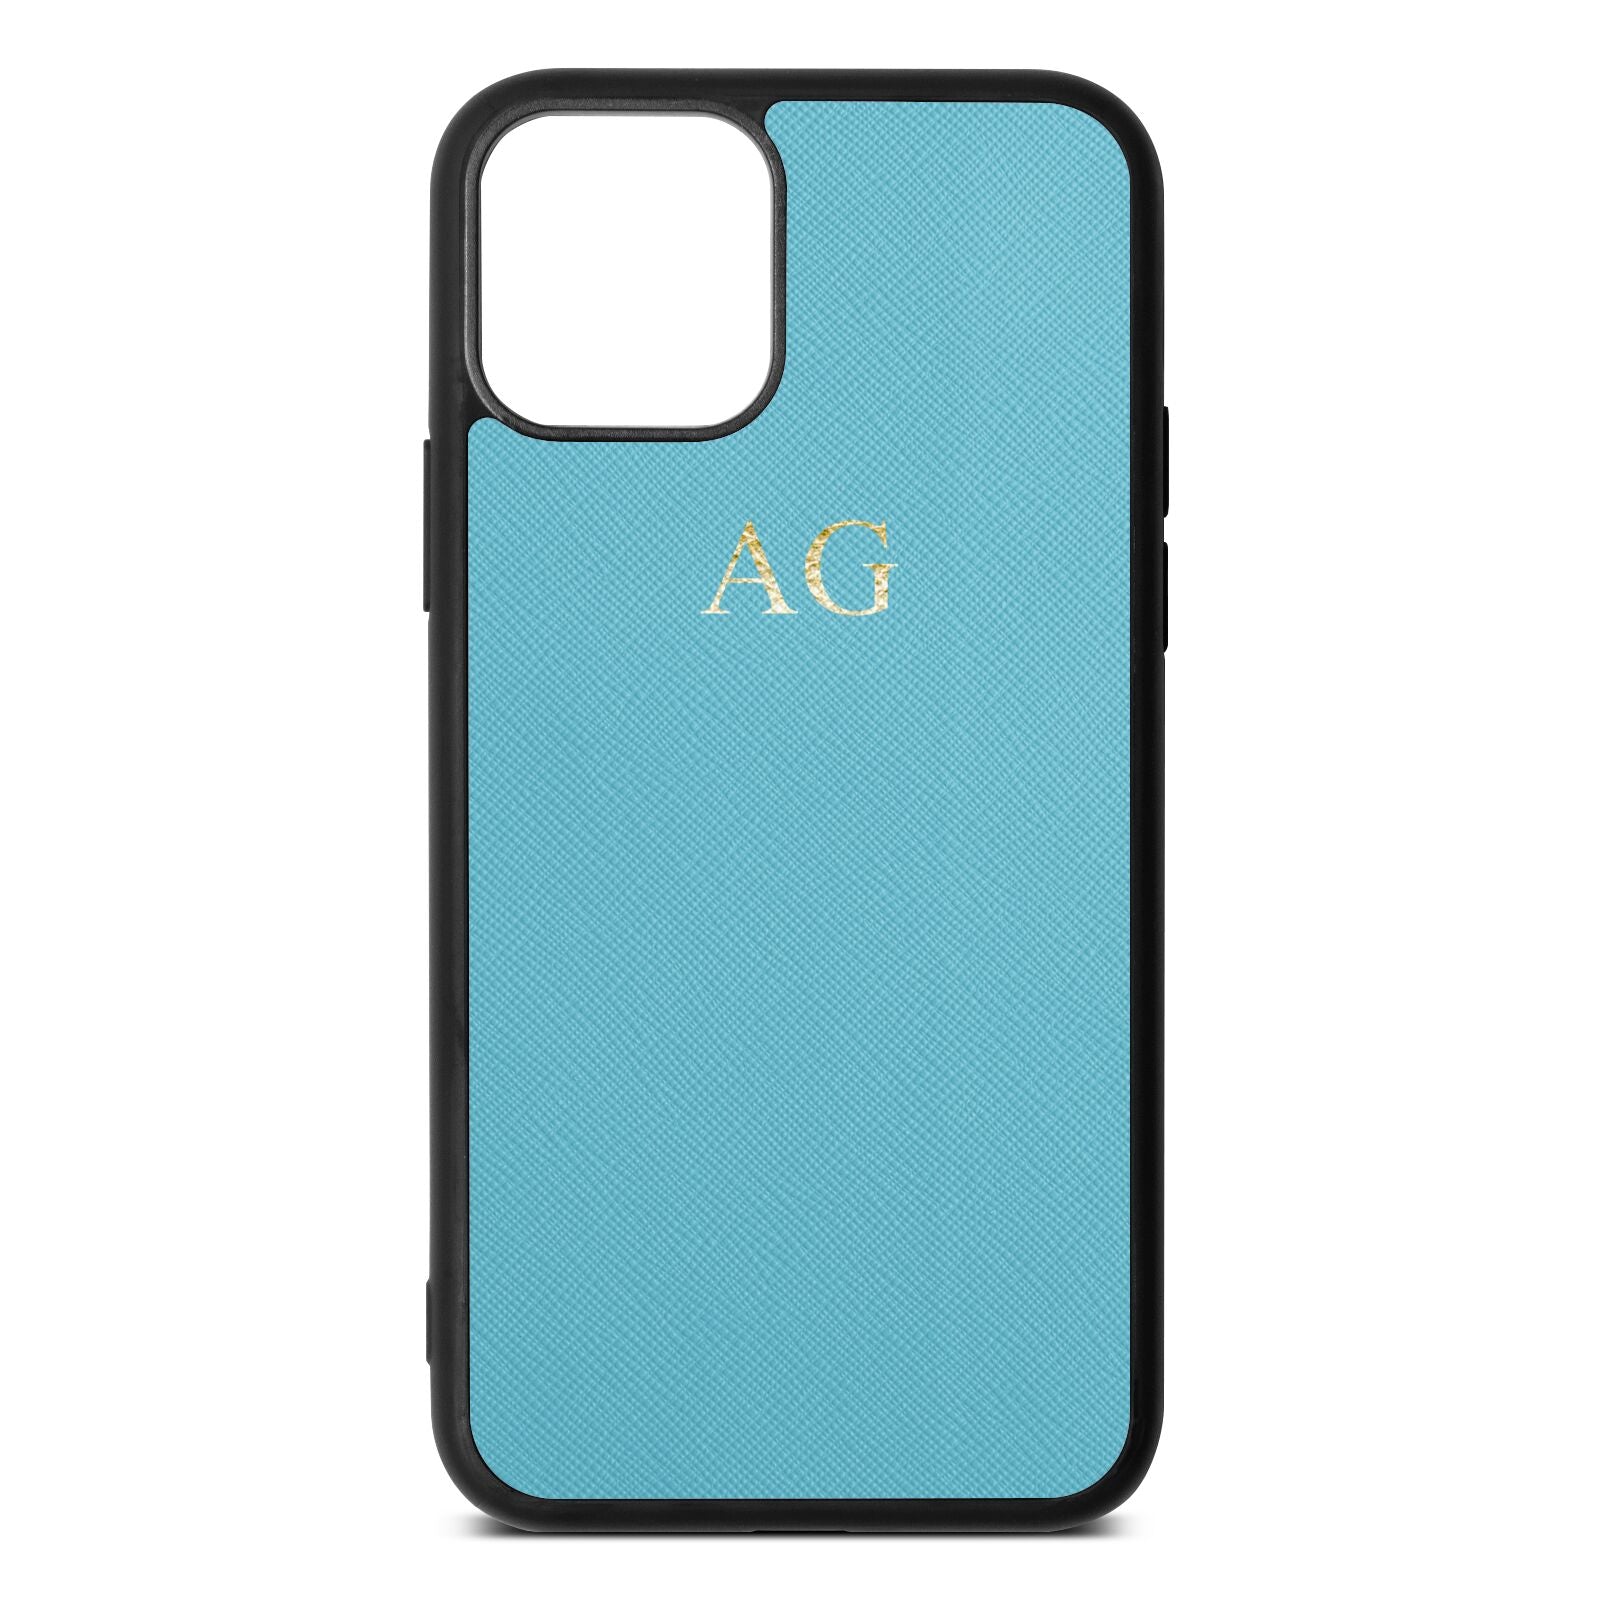 Personalised Sky Saffiano Leather iPhone 11 Case